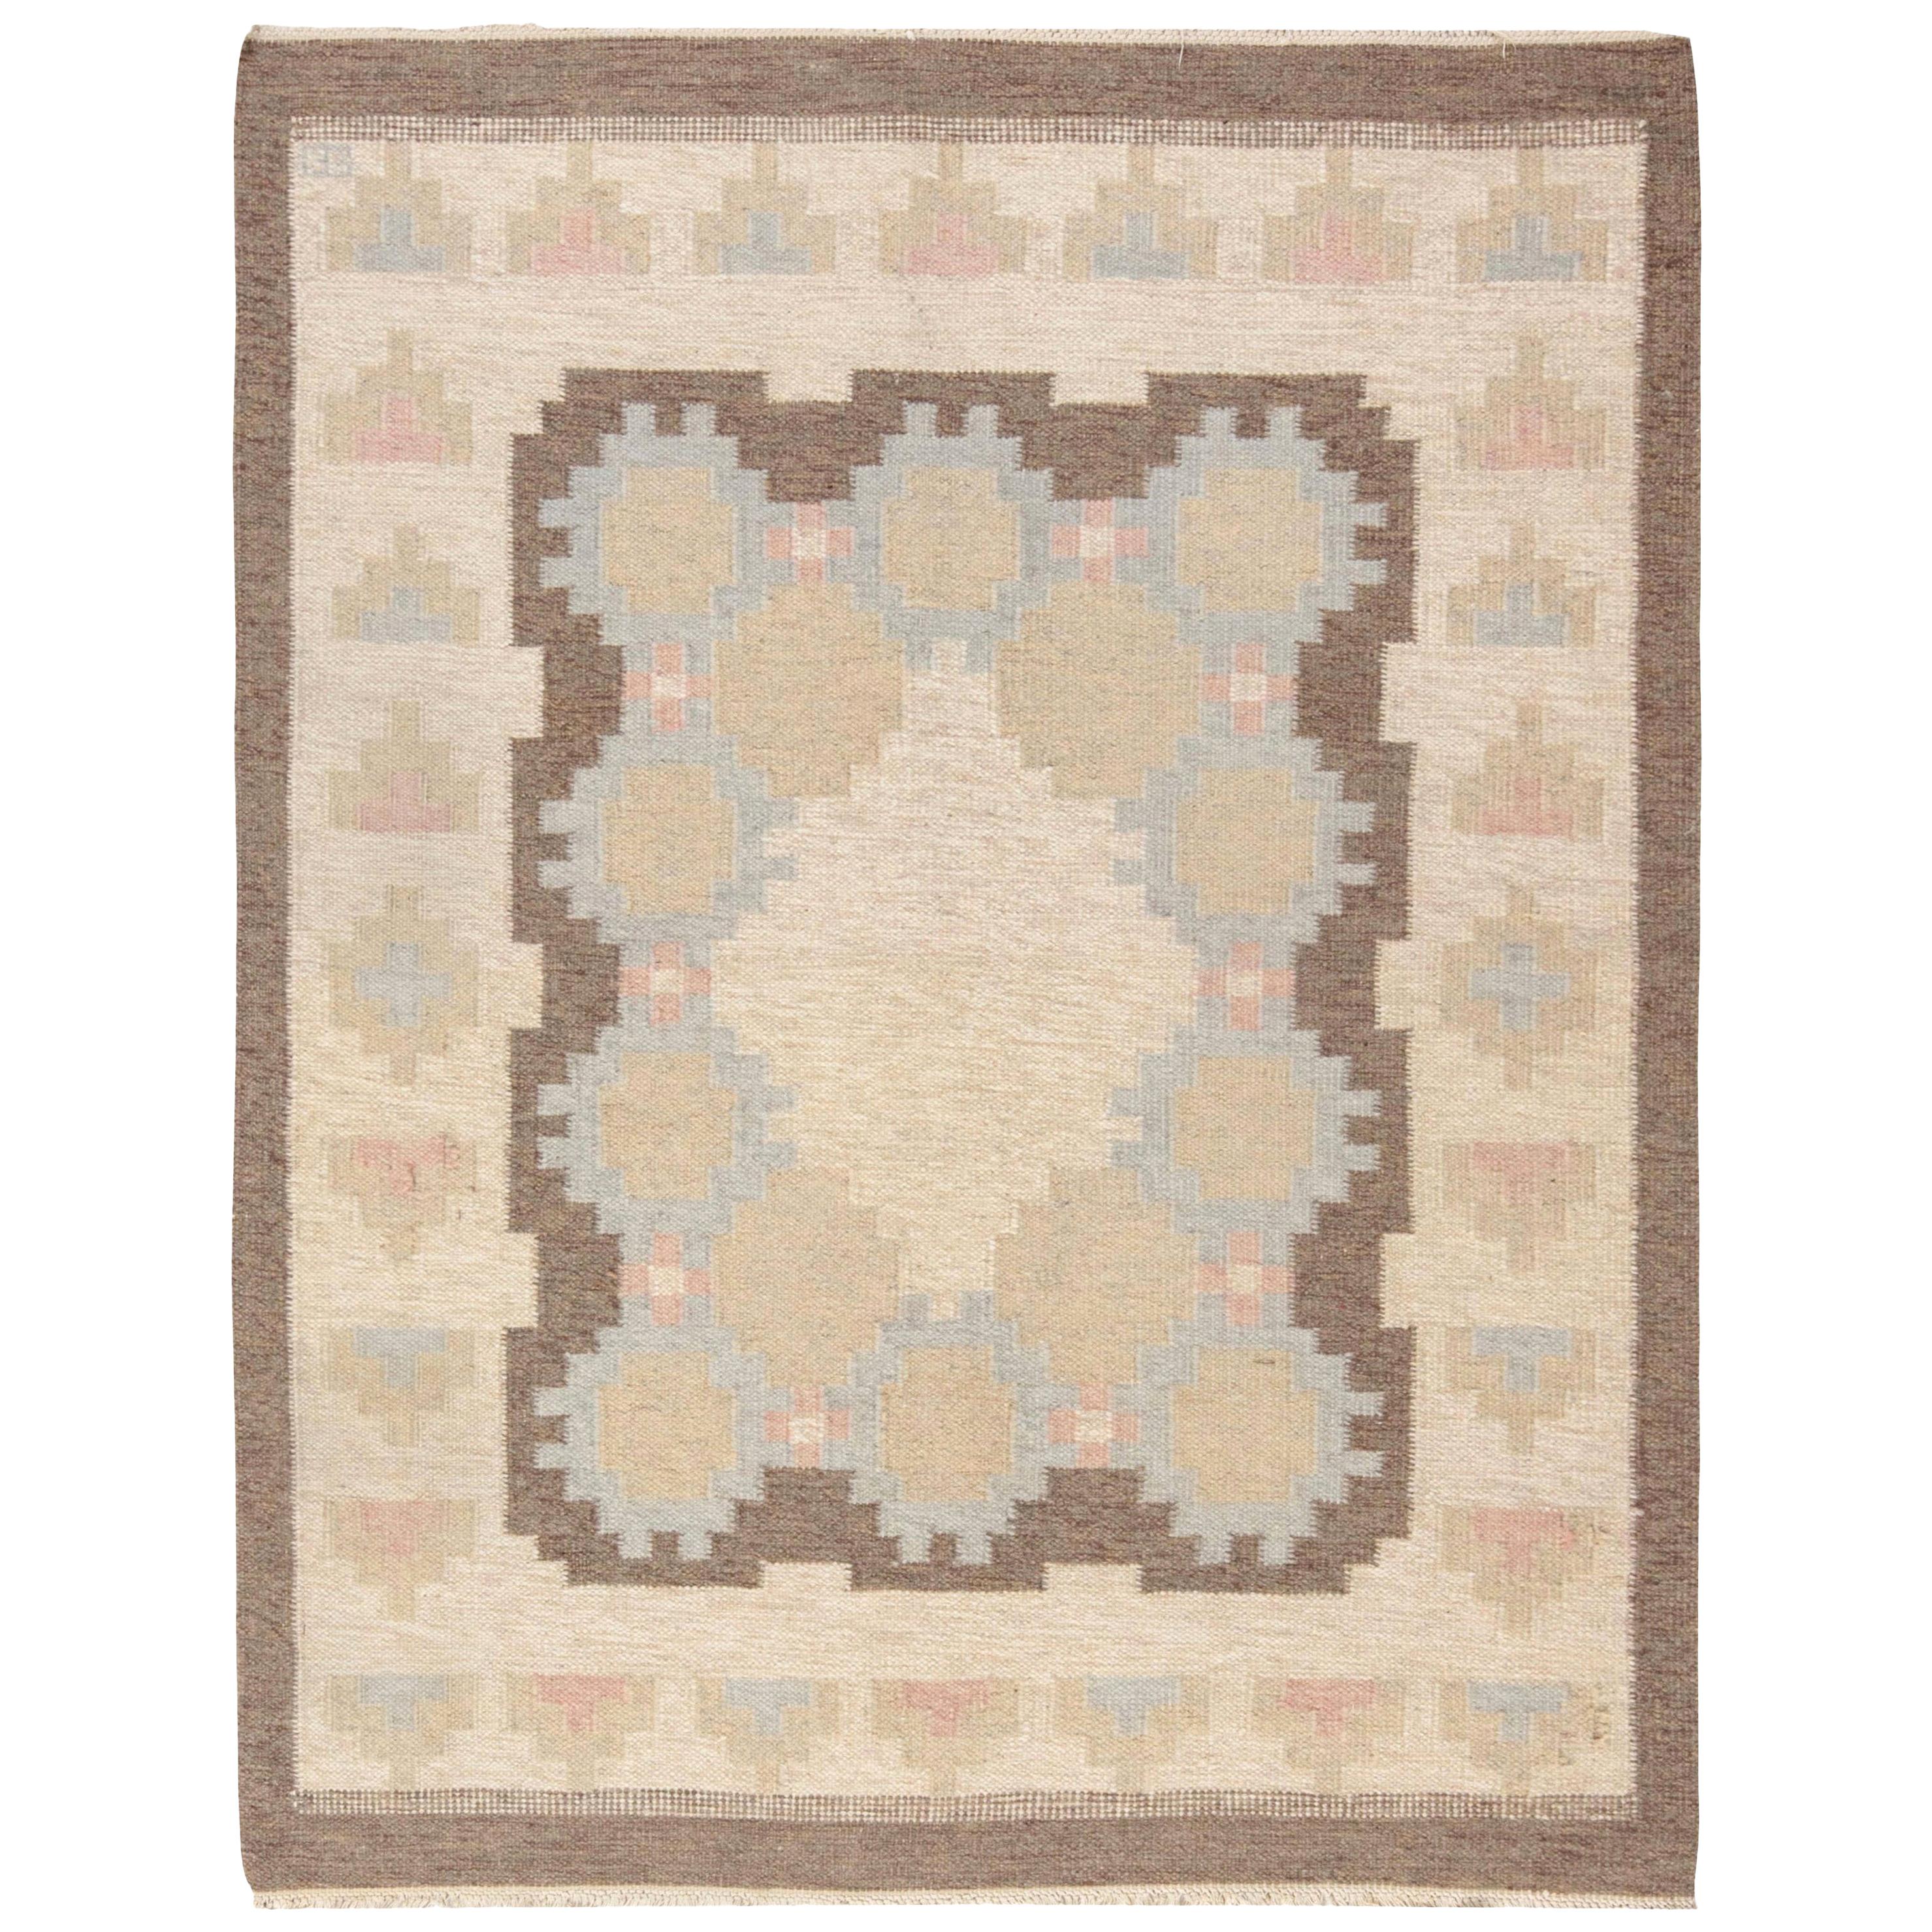 Mid-20th Century Swedish Beige, Brown and Blue Flat-Weave Wool Rug